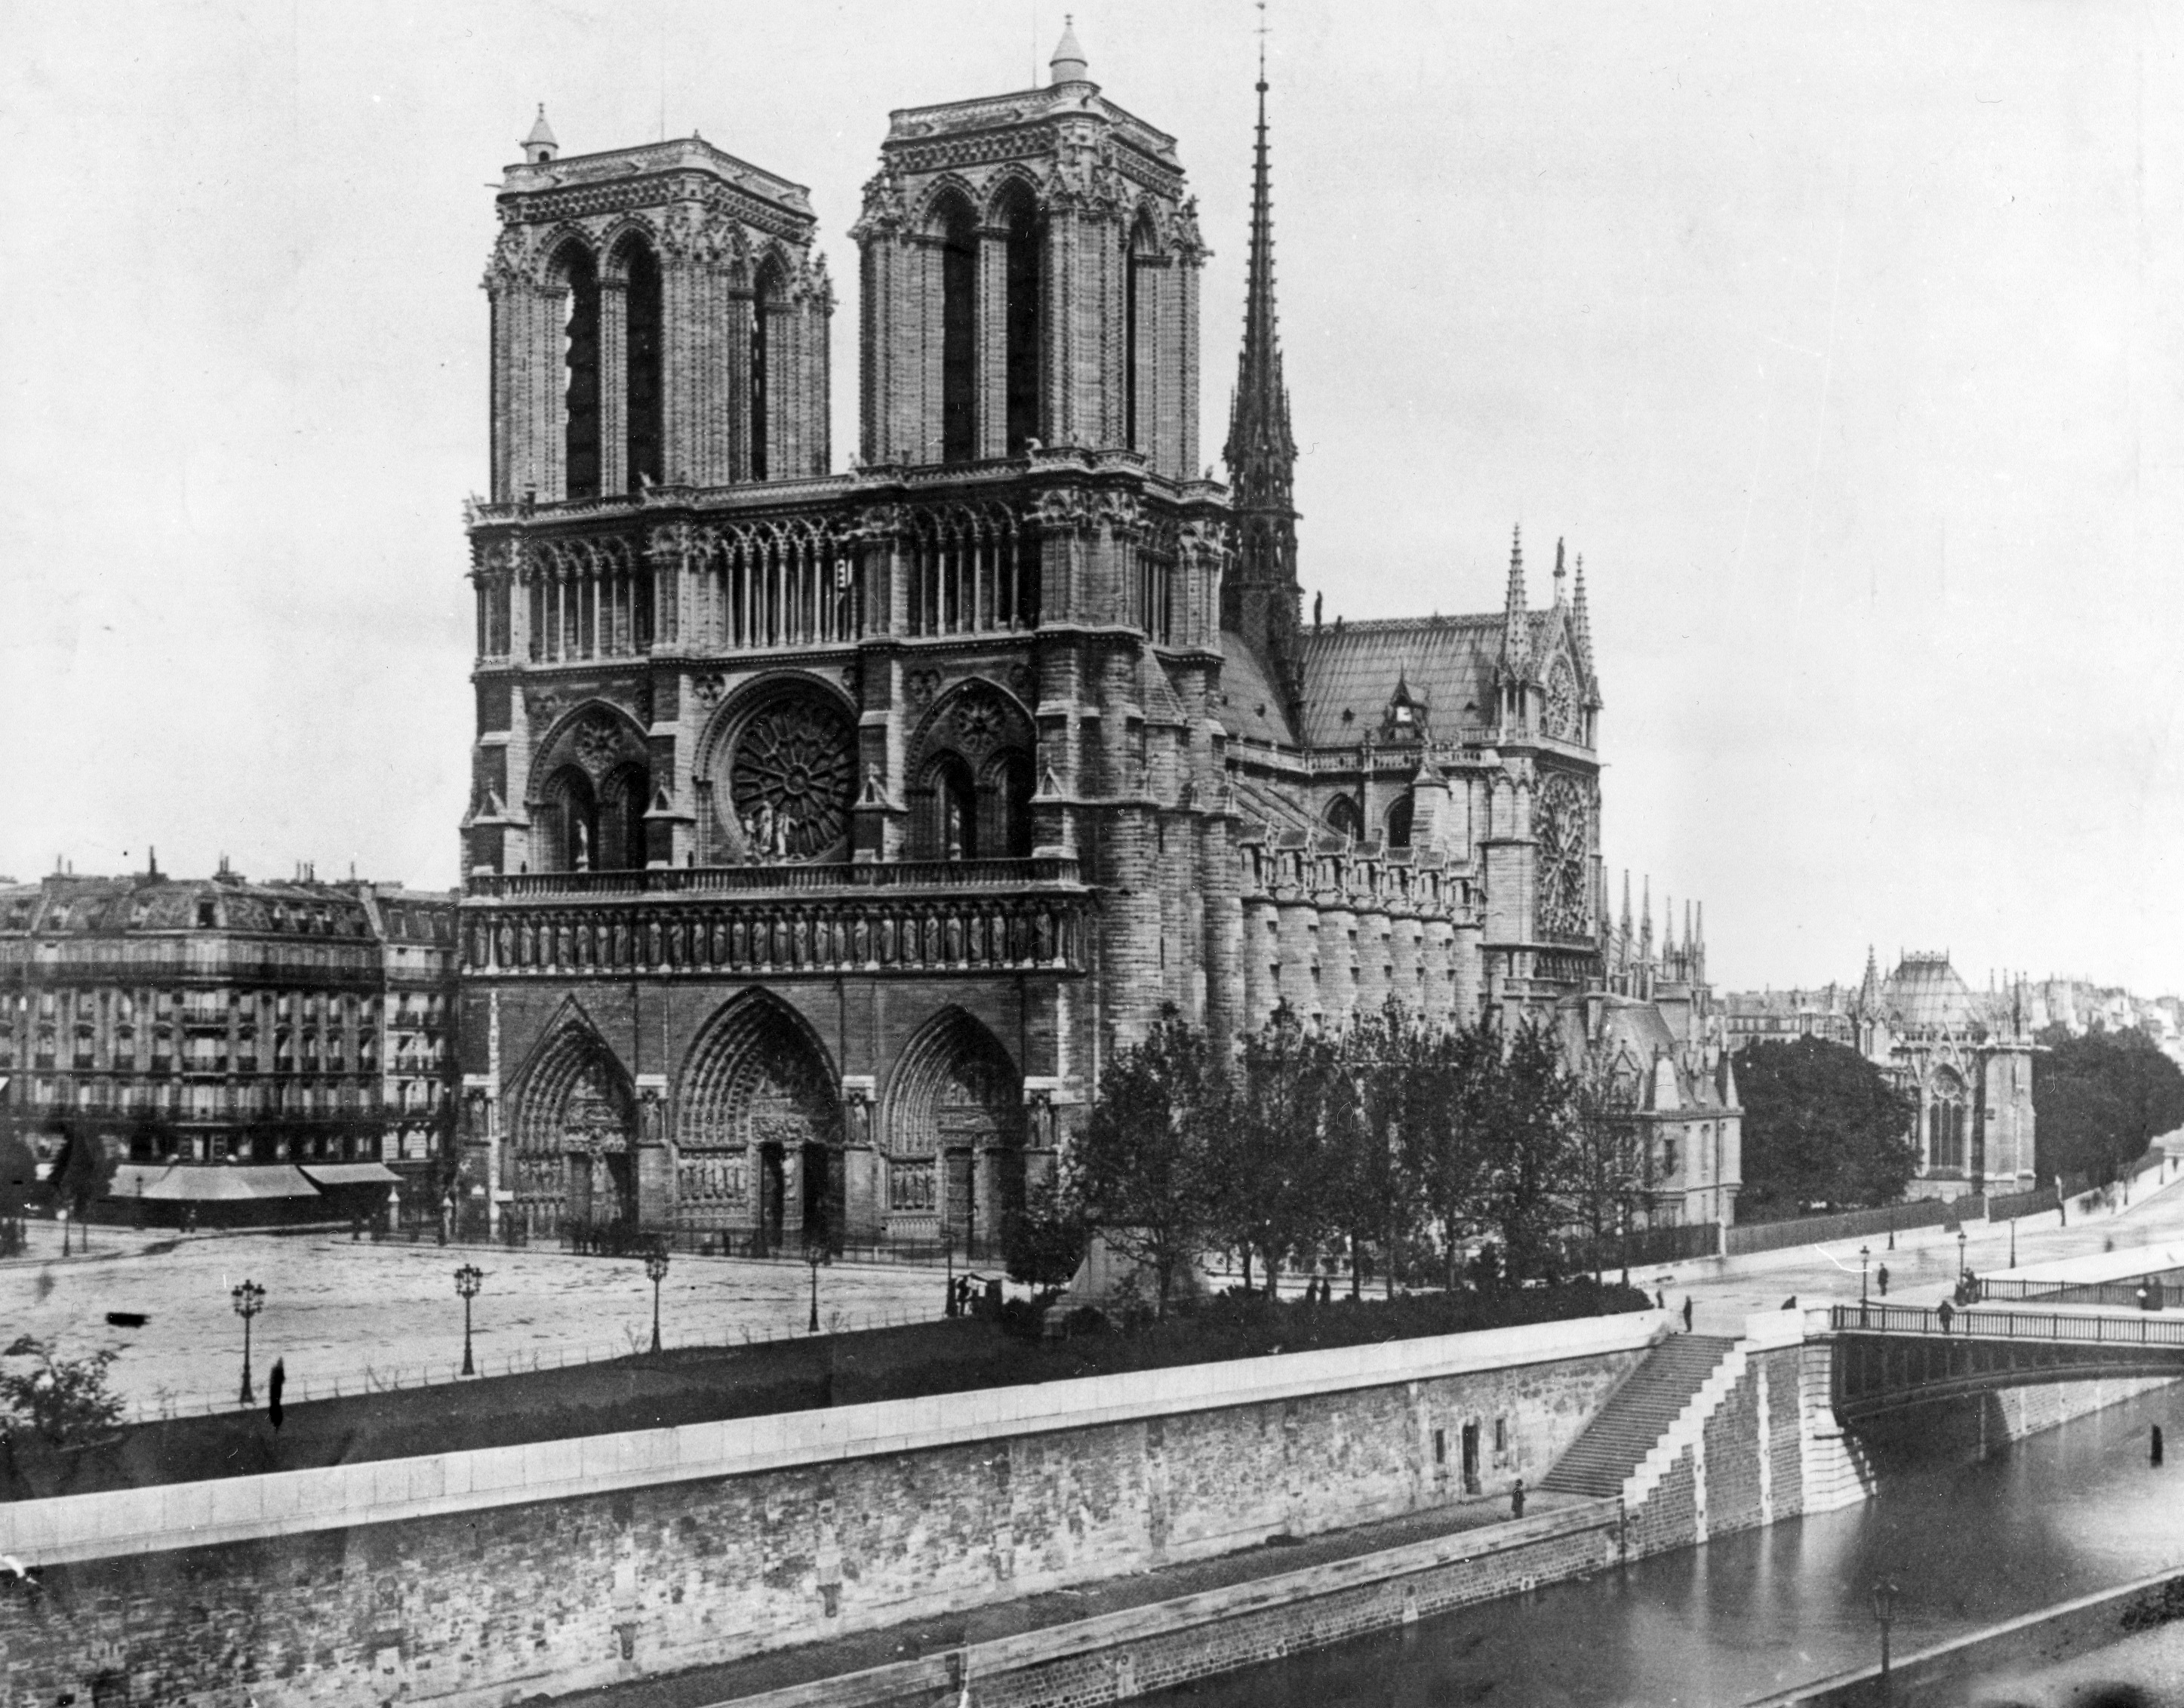 Notre Dame hailed as monument to the 'best of civilization'